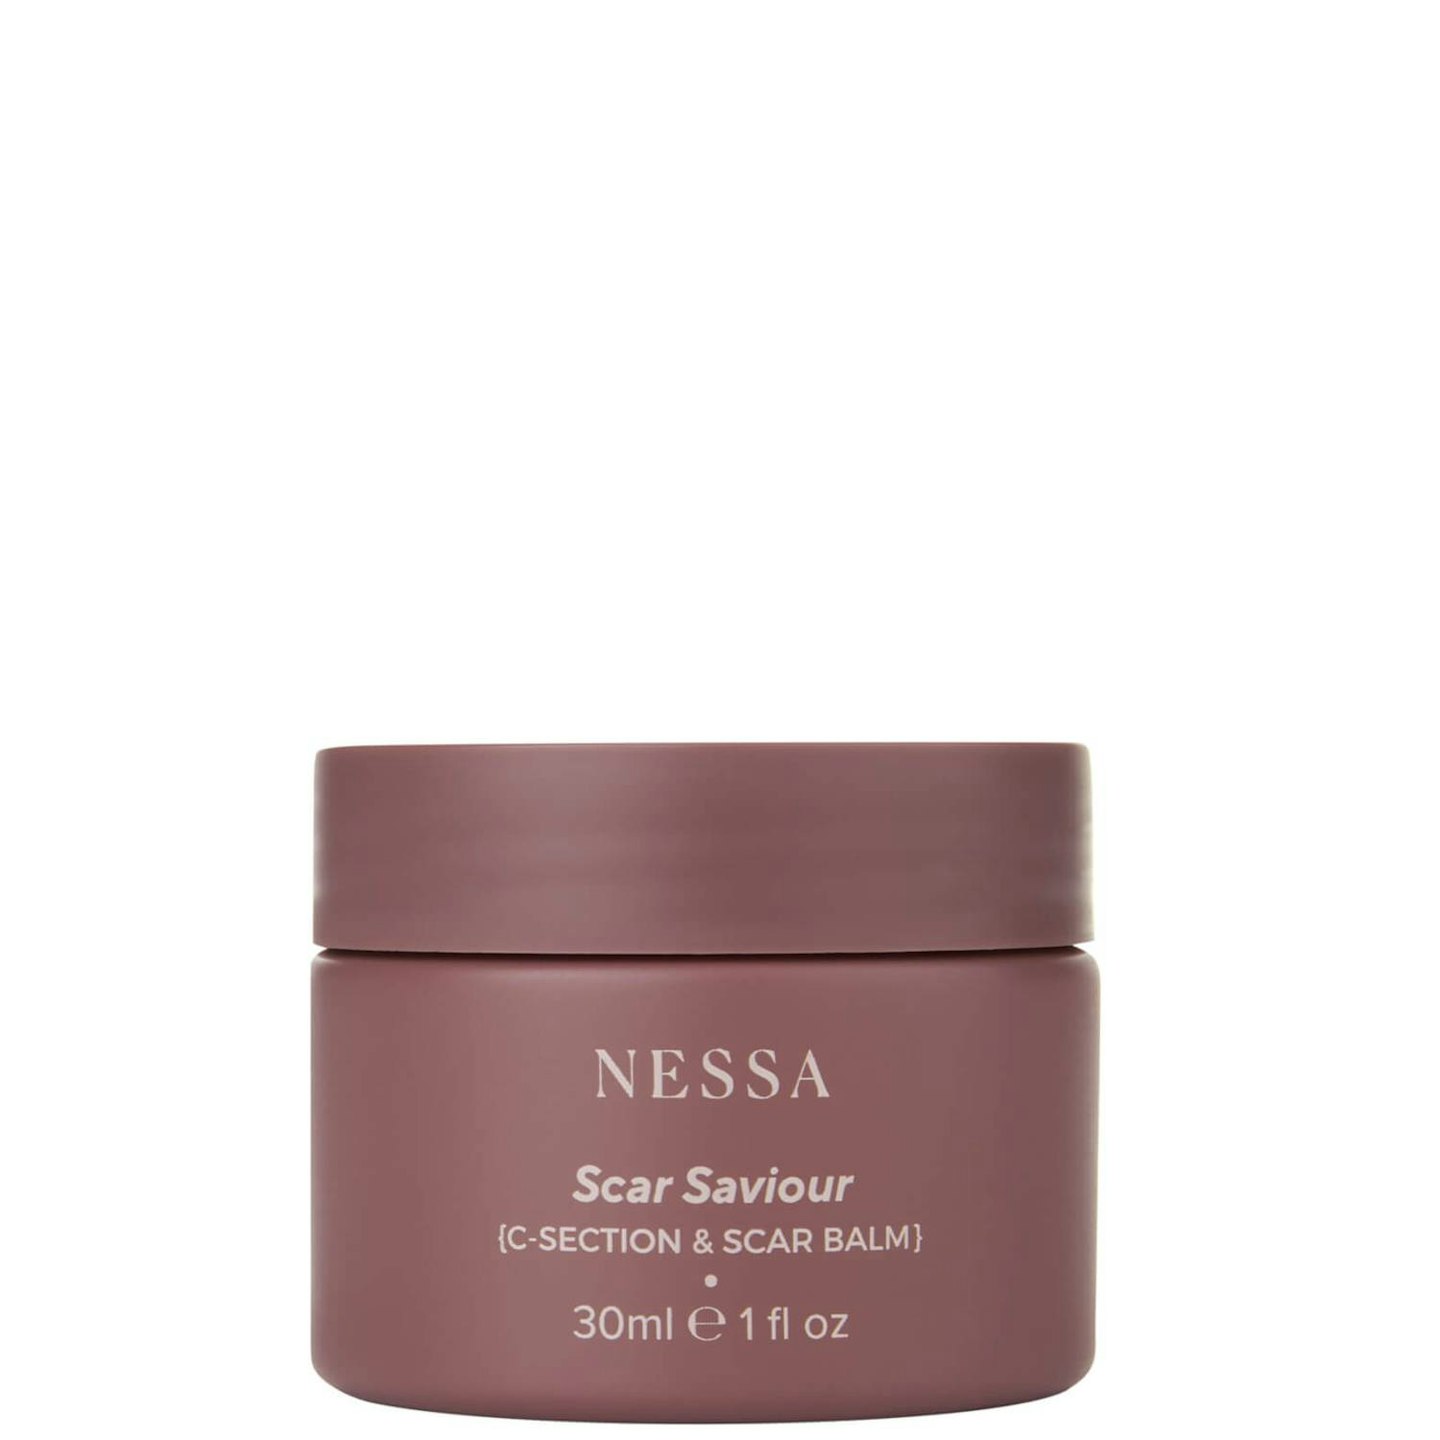 The C-Section Scar Cream Millie Macintosh Wouldn't Be Without